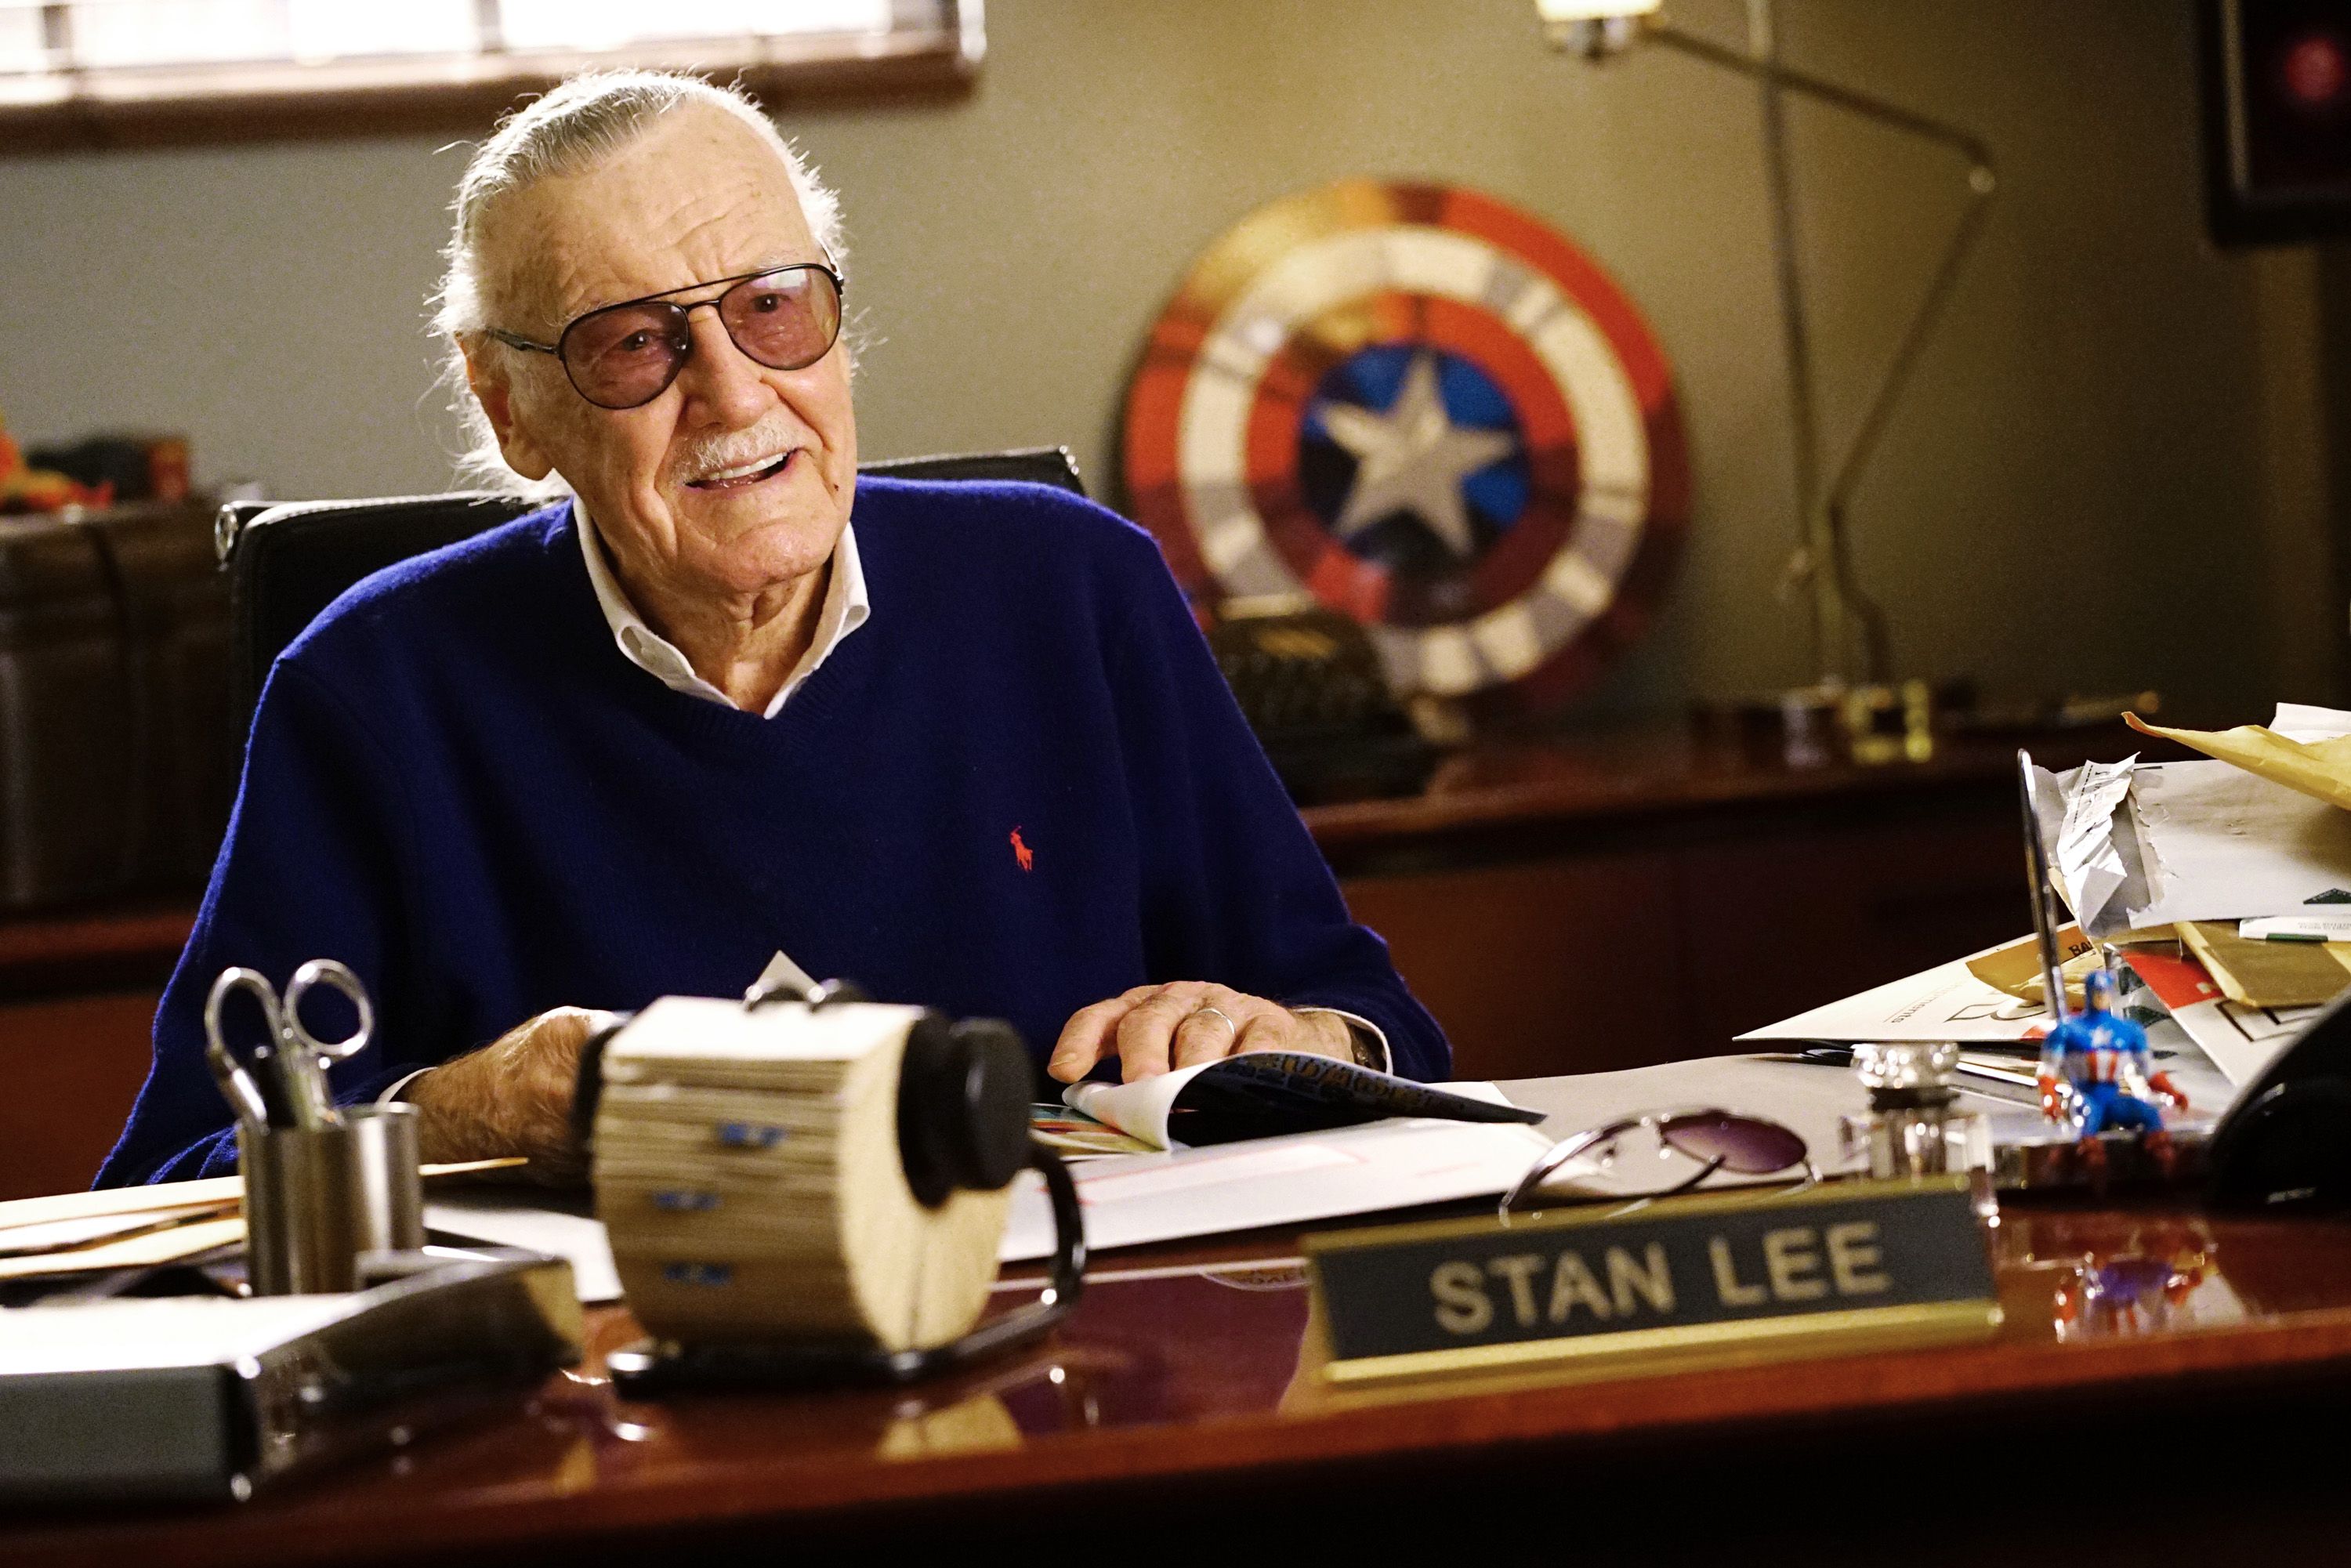 Stan Lee's Most Memorable Quotes - 10 of Stan Lee's Most Inspiring Quotes